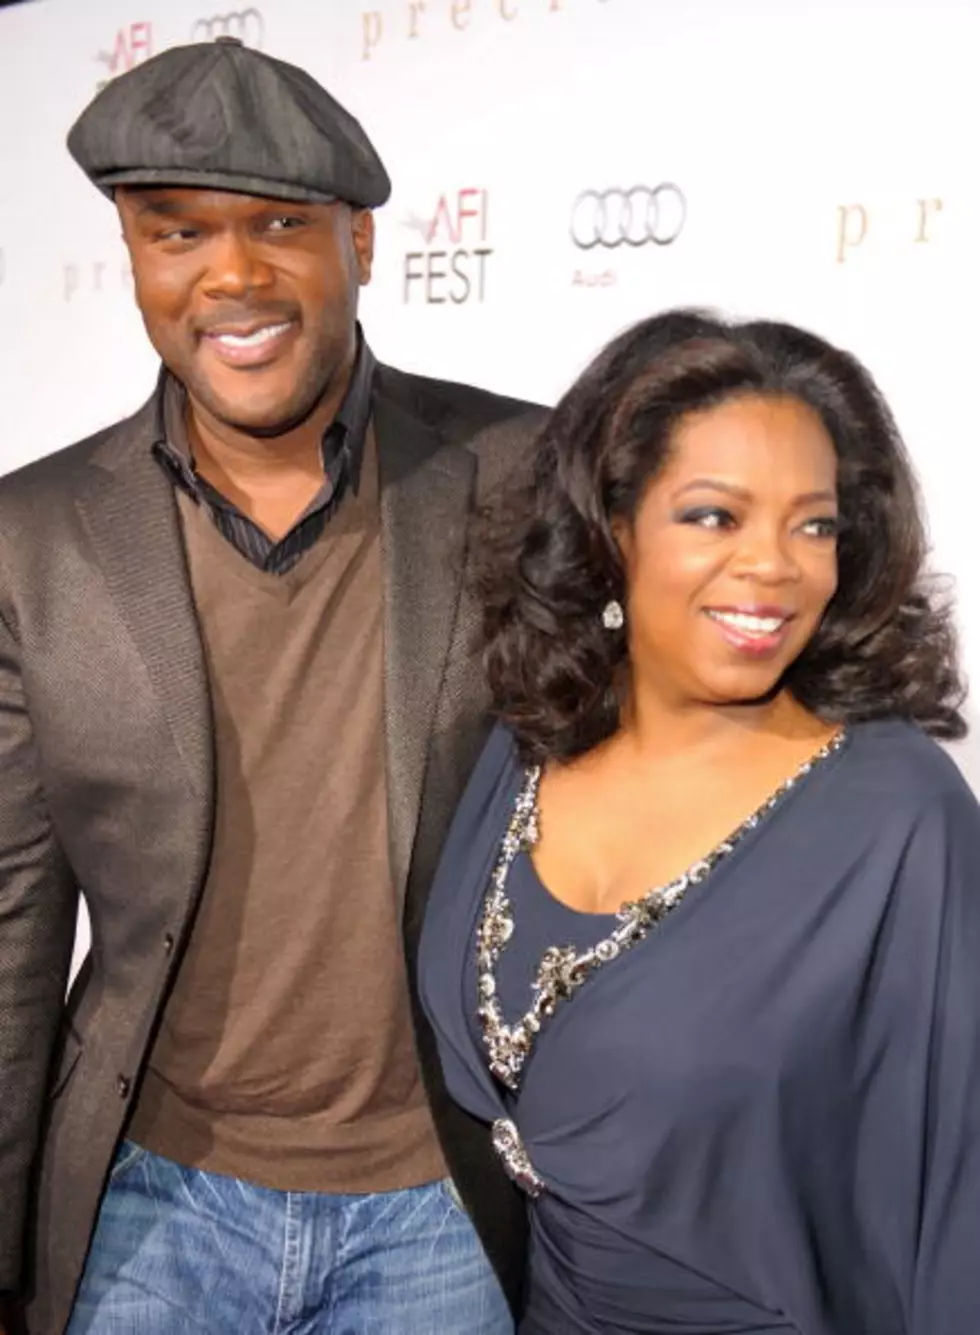 Tyler Perry Lands Partnership With Oprah Winfrey’s OWN